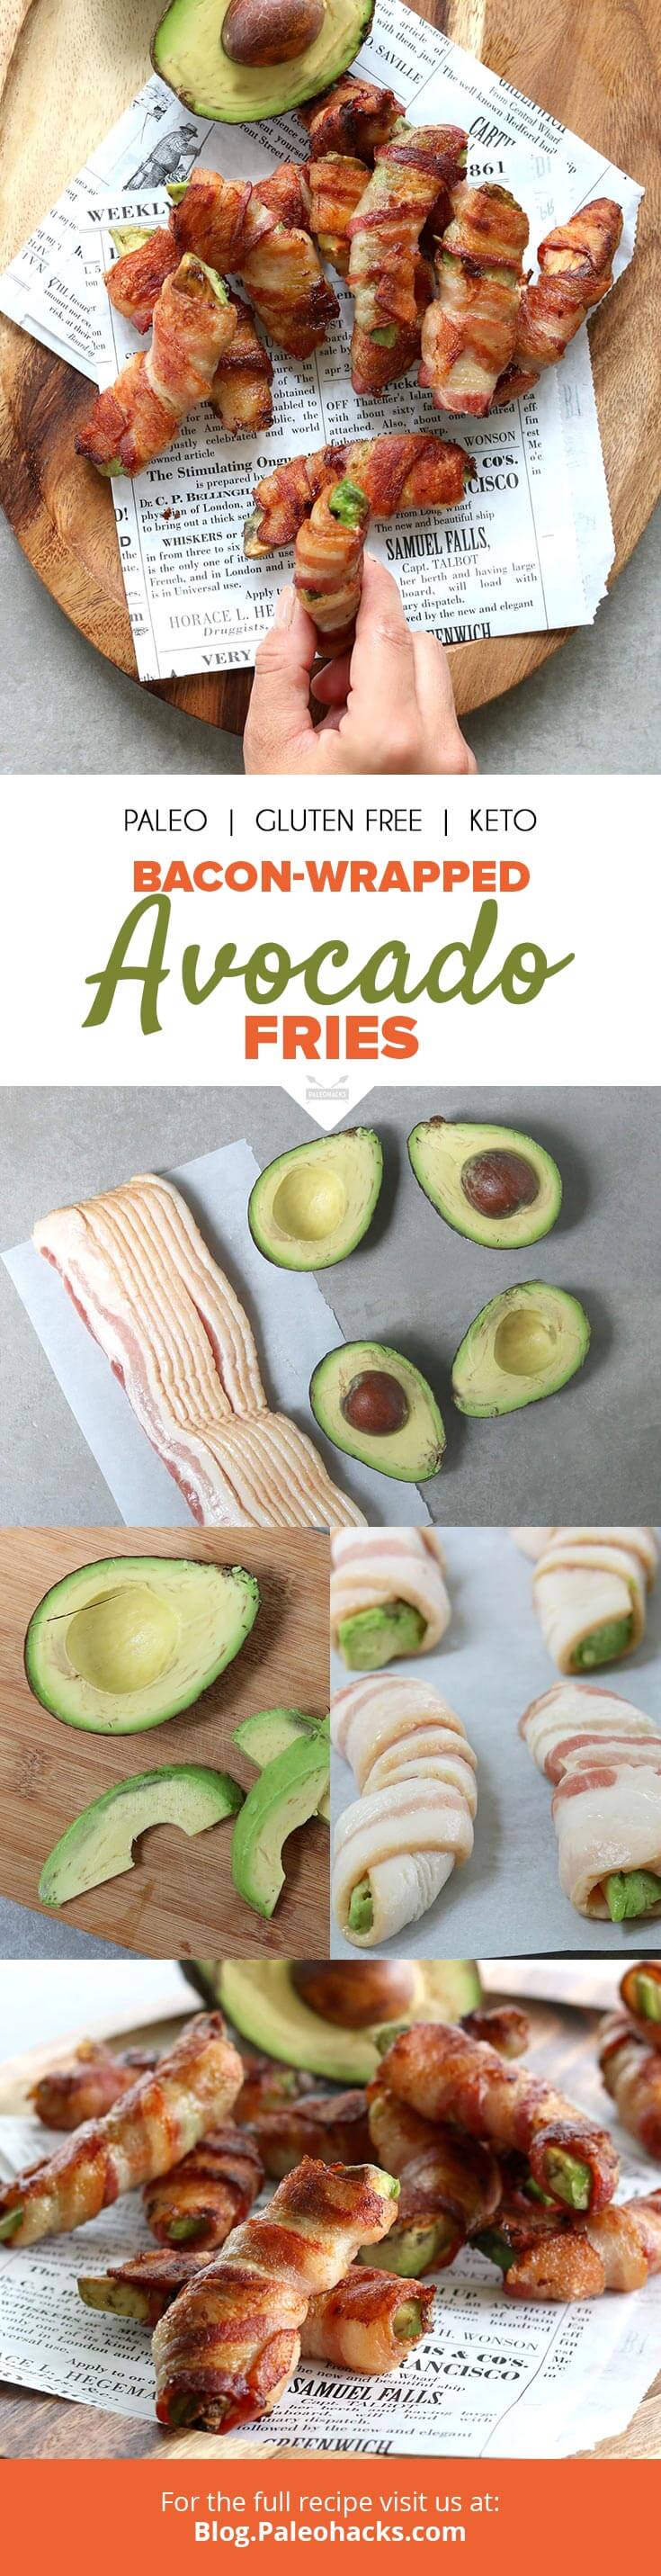 You’ve never tried avocado like this before. With a crispy bacon outside, and creamy center, these bacon-wrapped avocado fries are the perfect savory snack.